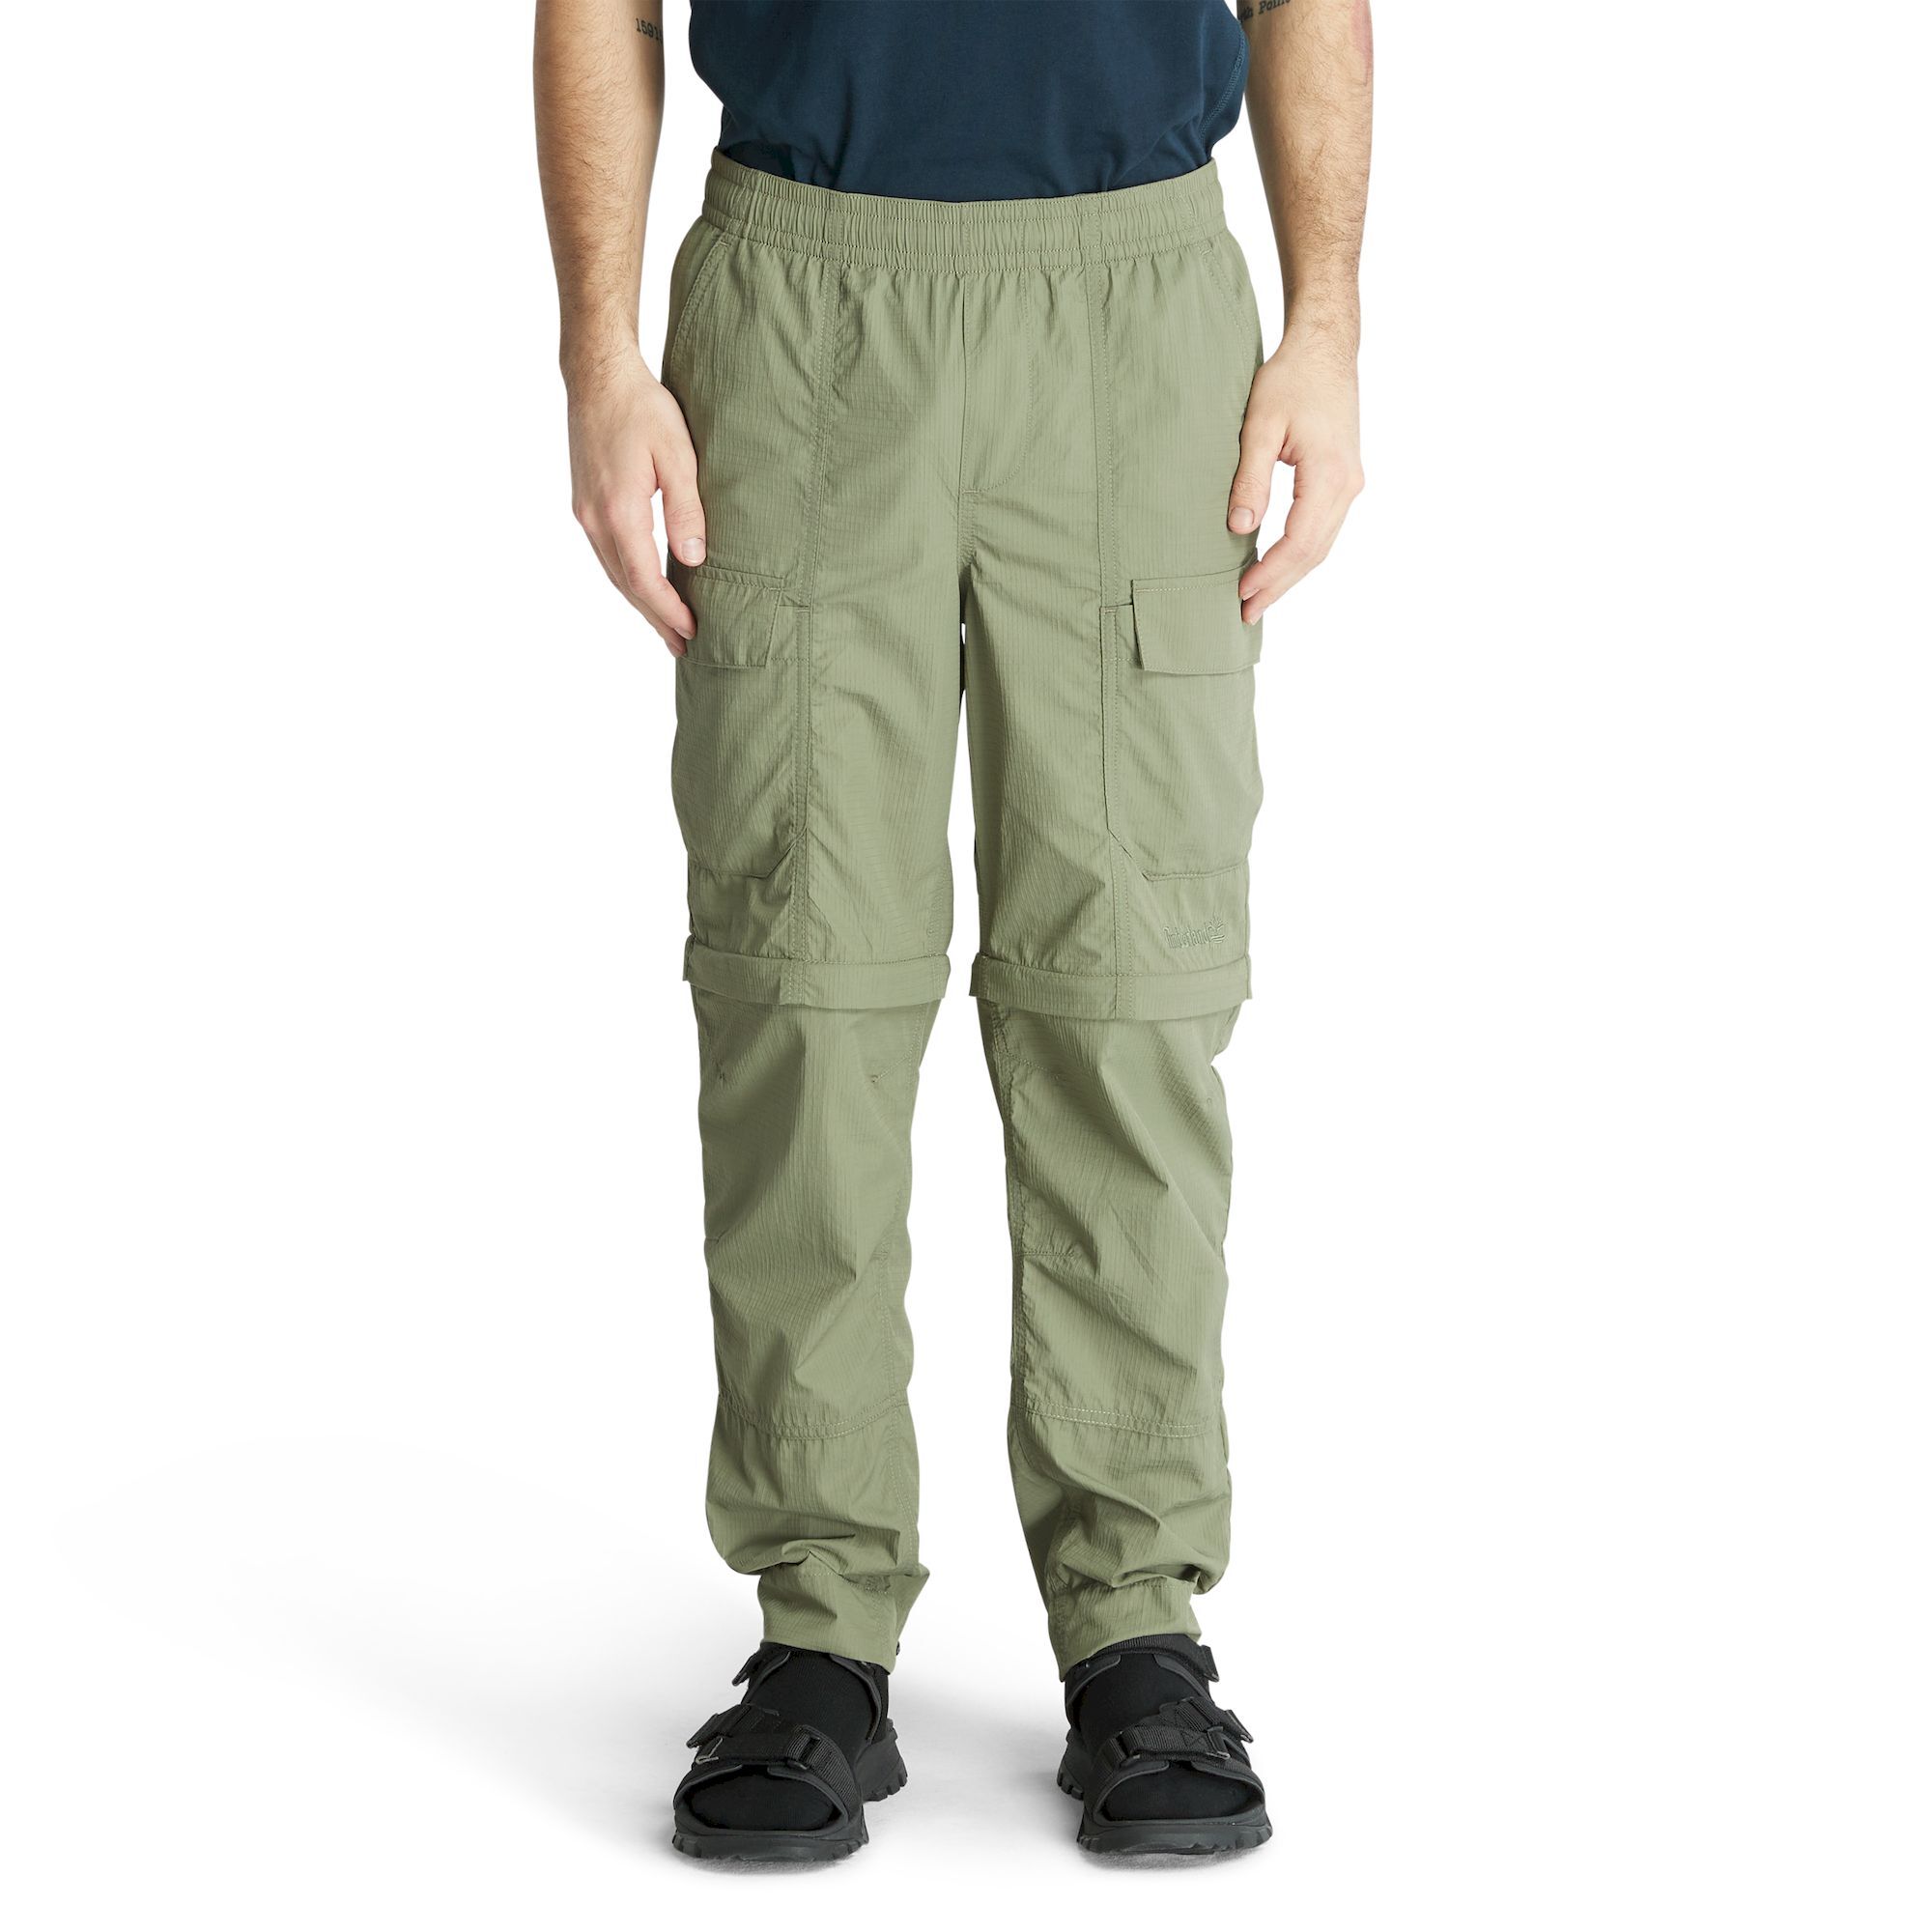 https://images.hardloop.fr/409873/timberland-dwr-pant-walking-trousers-mens.jpg?w=auto&h=auto&q=80